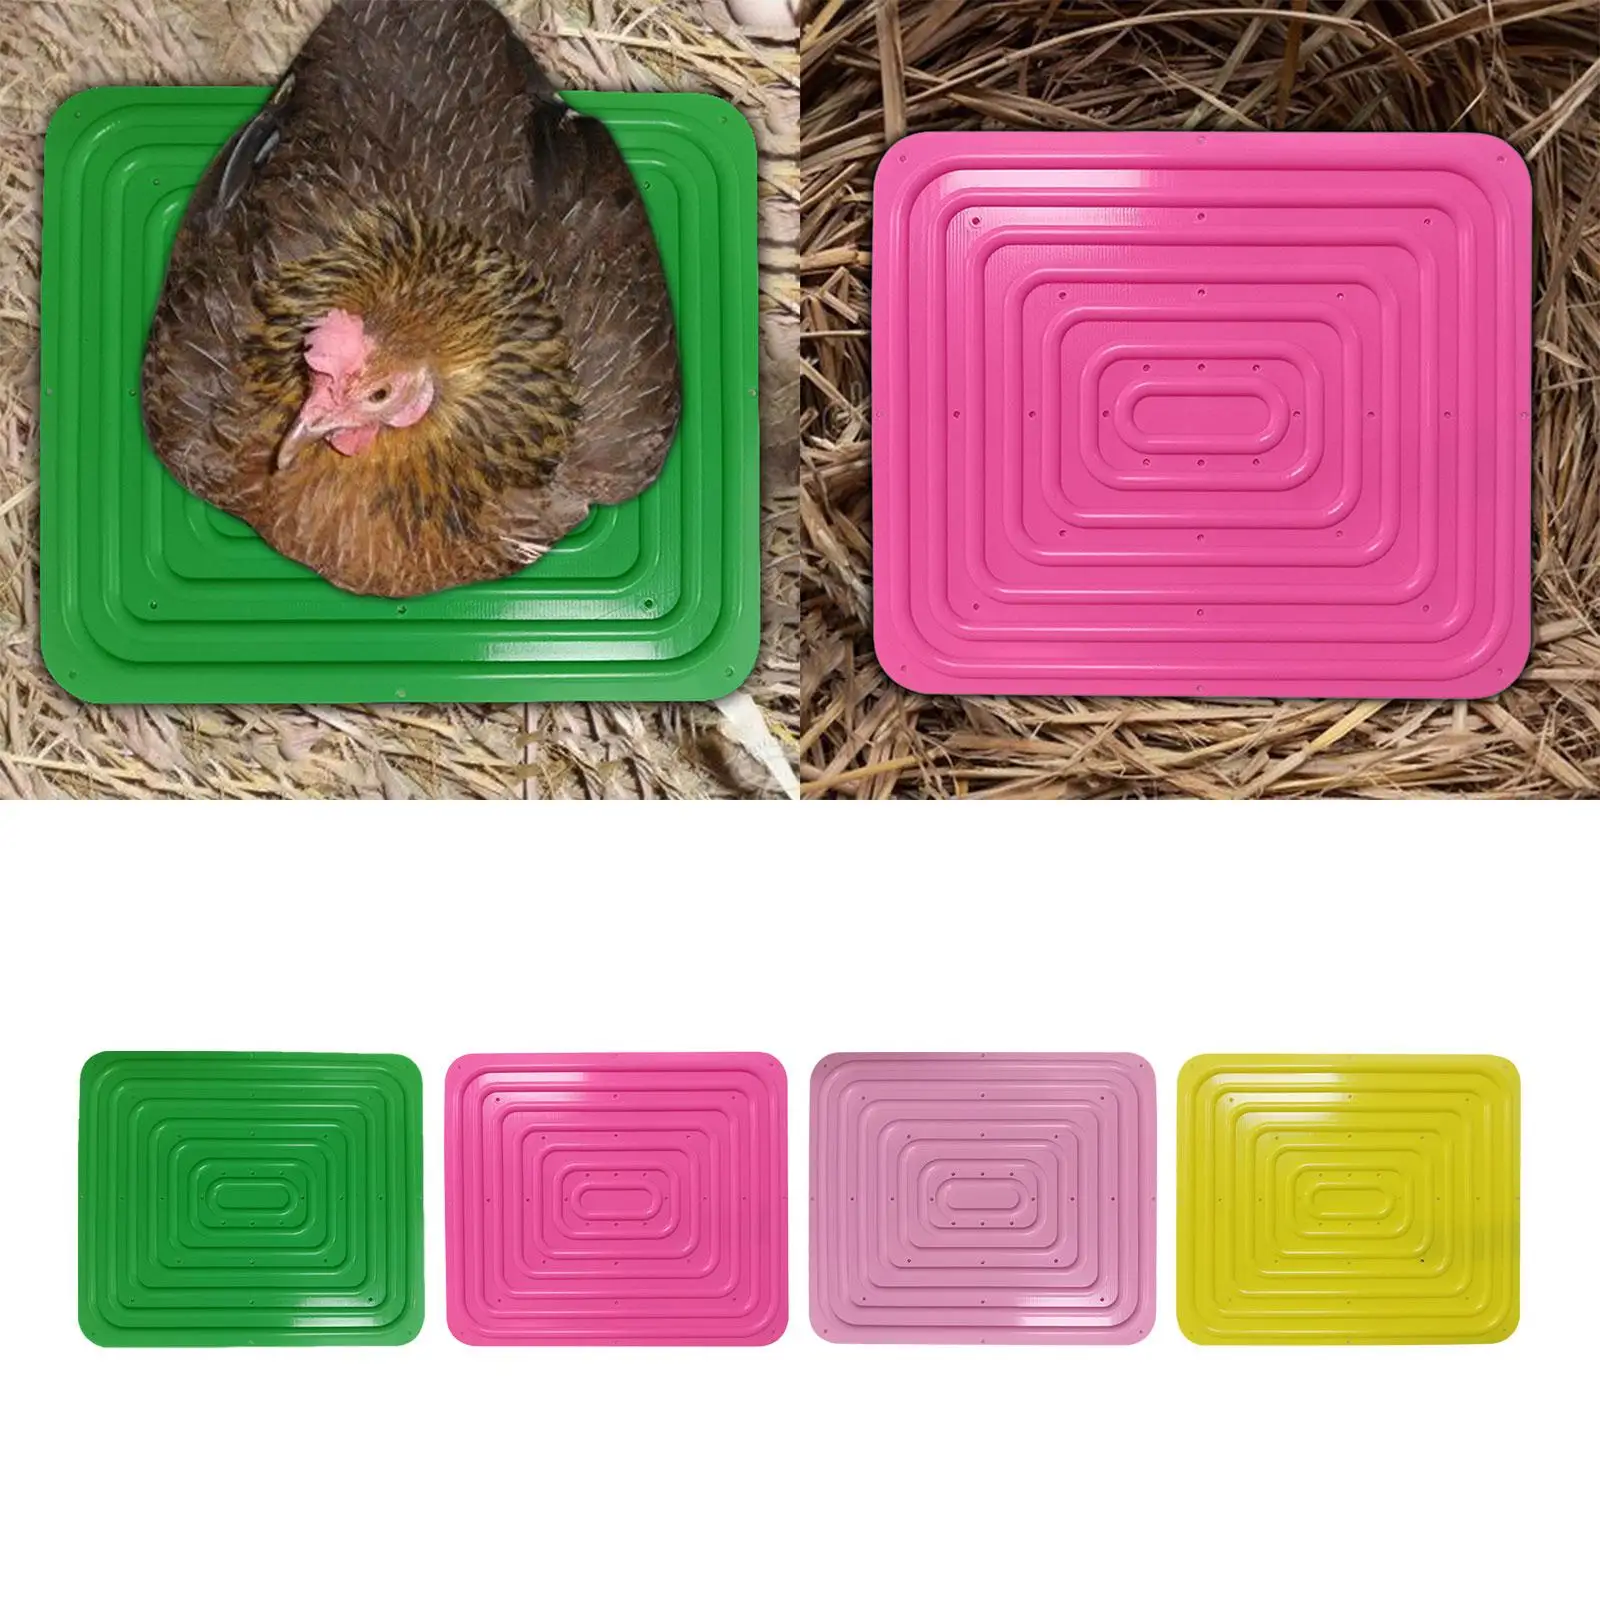 Chicken Nesting Pads for Laying Eggs Laying Mat Durable Chicken Nest Pad Chicken Bedding for Hen House Poultry Garden